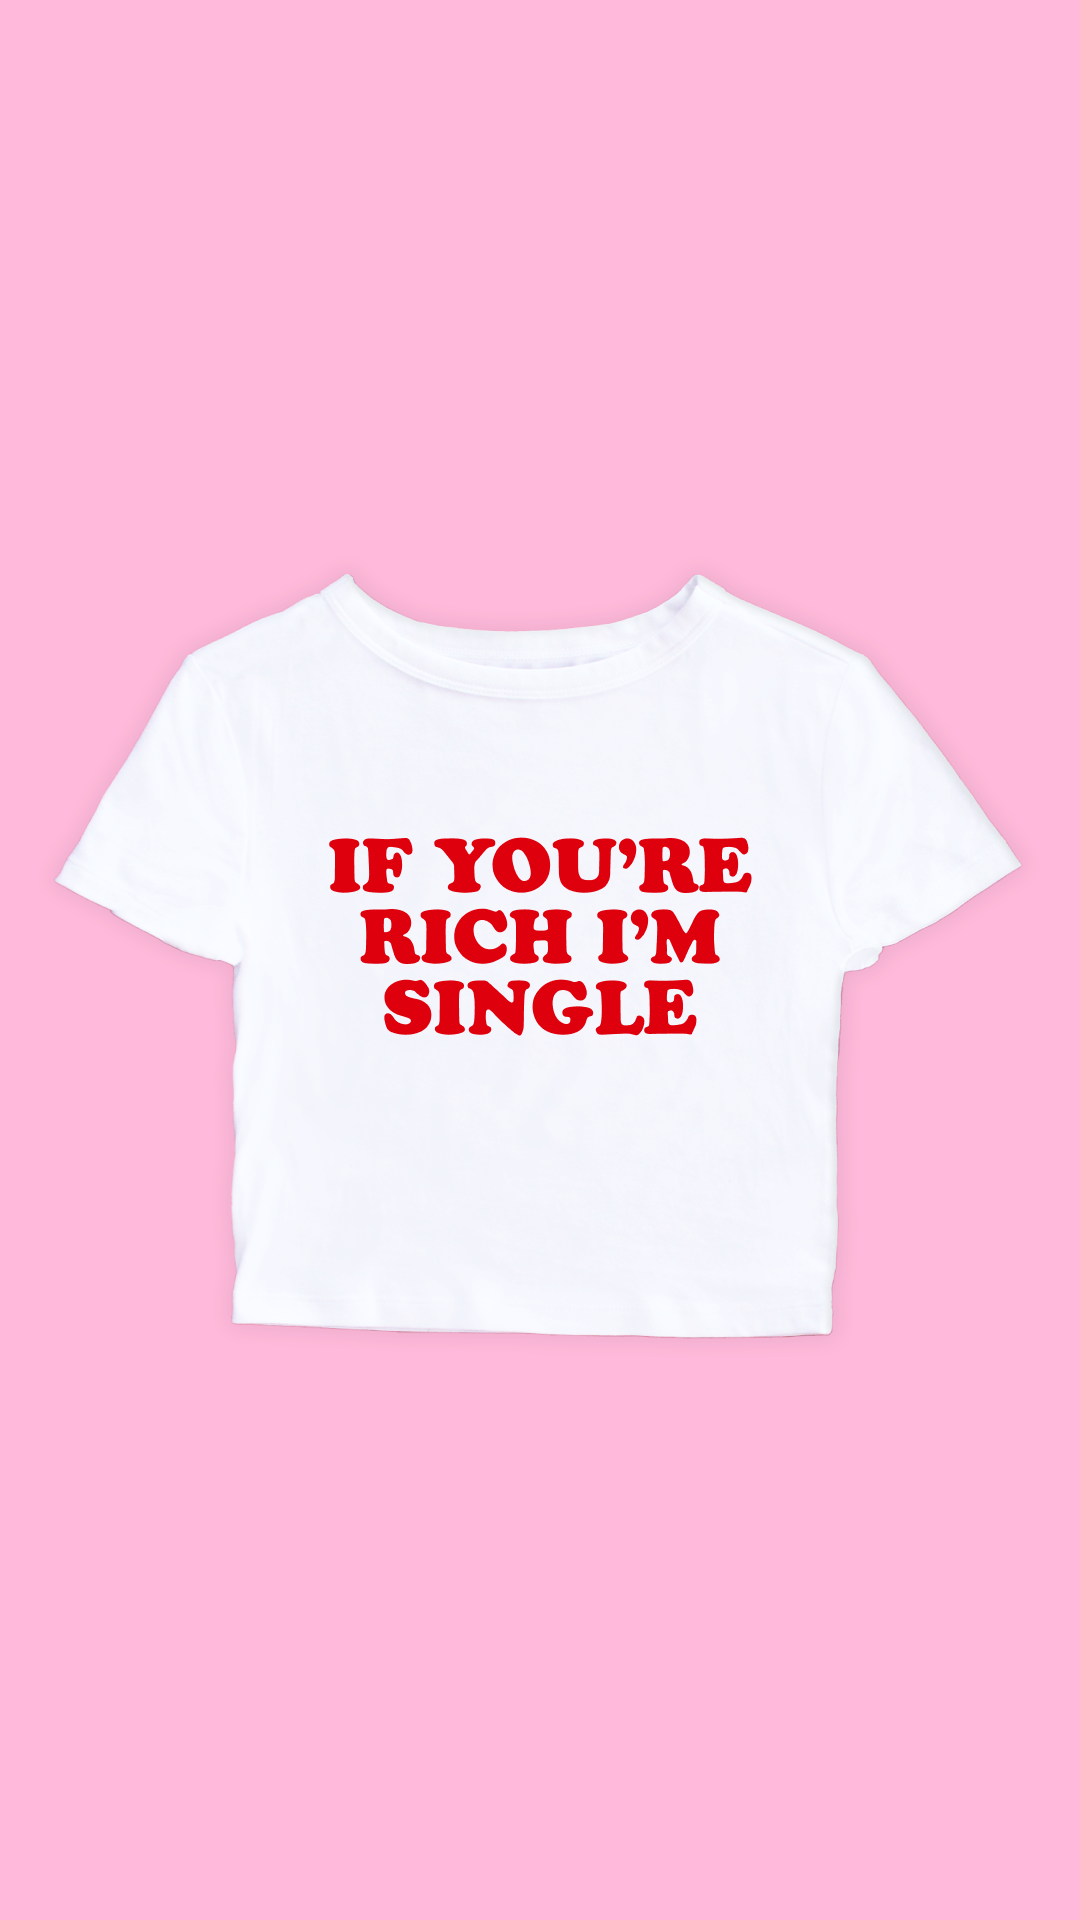 IF YOU'RE RICH I'M SINGLE